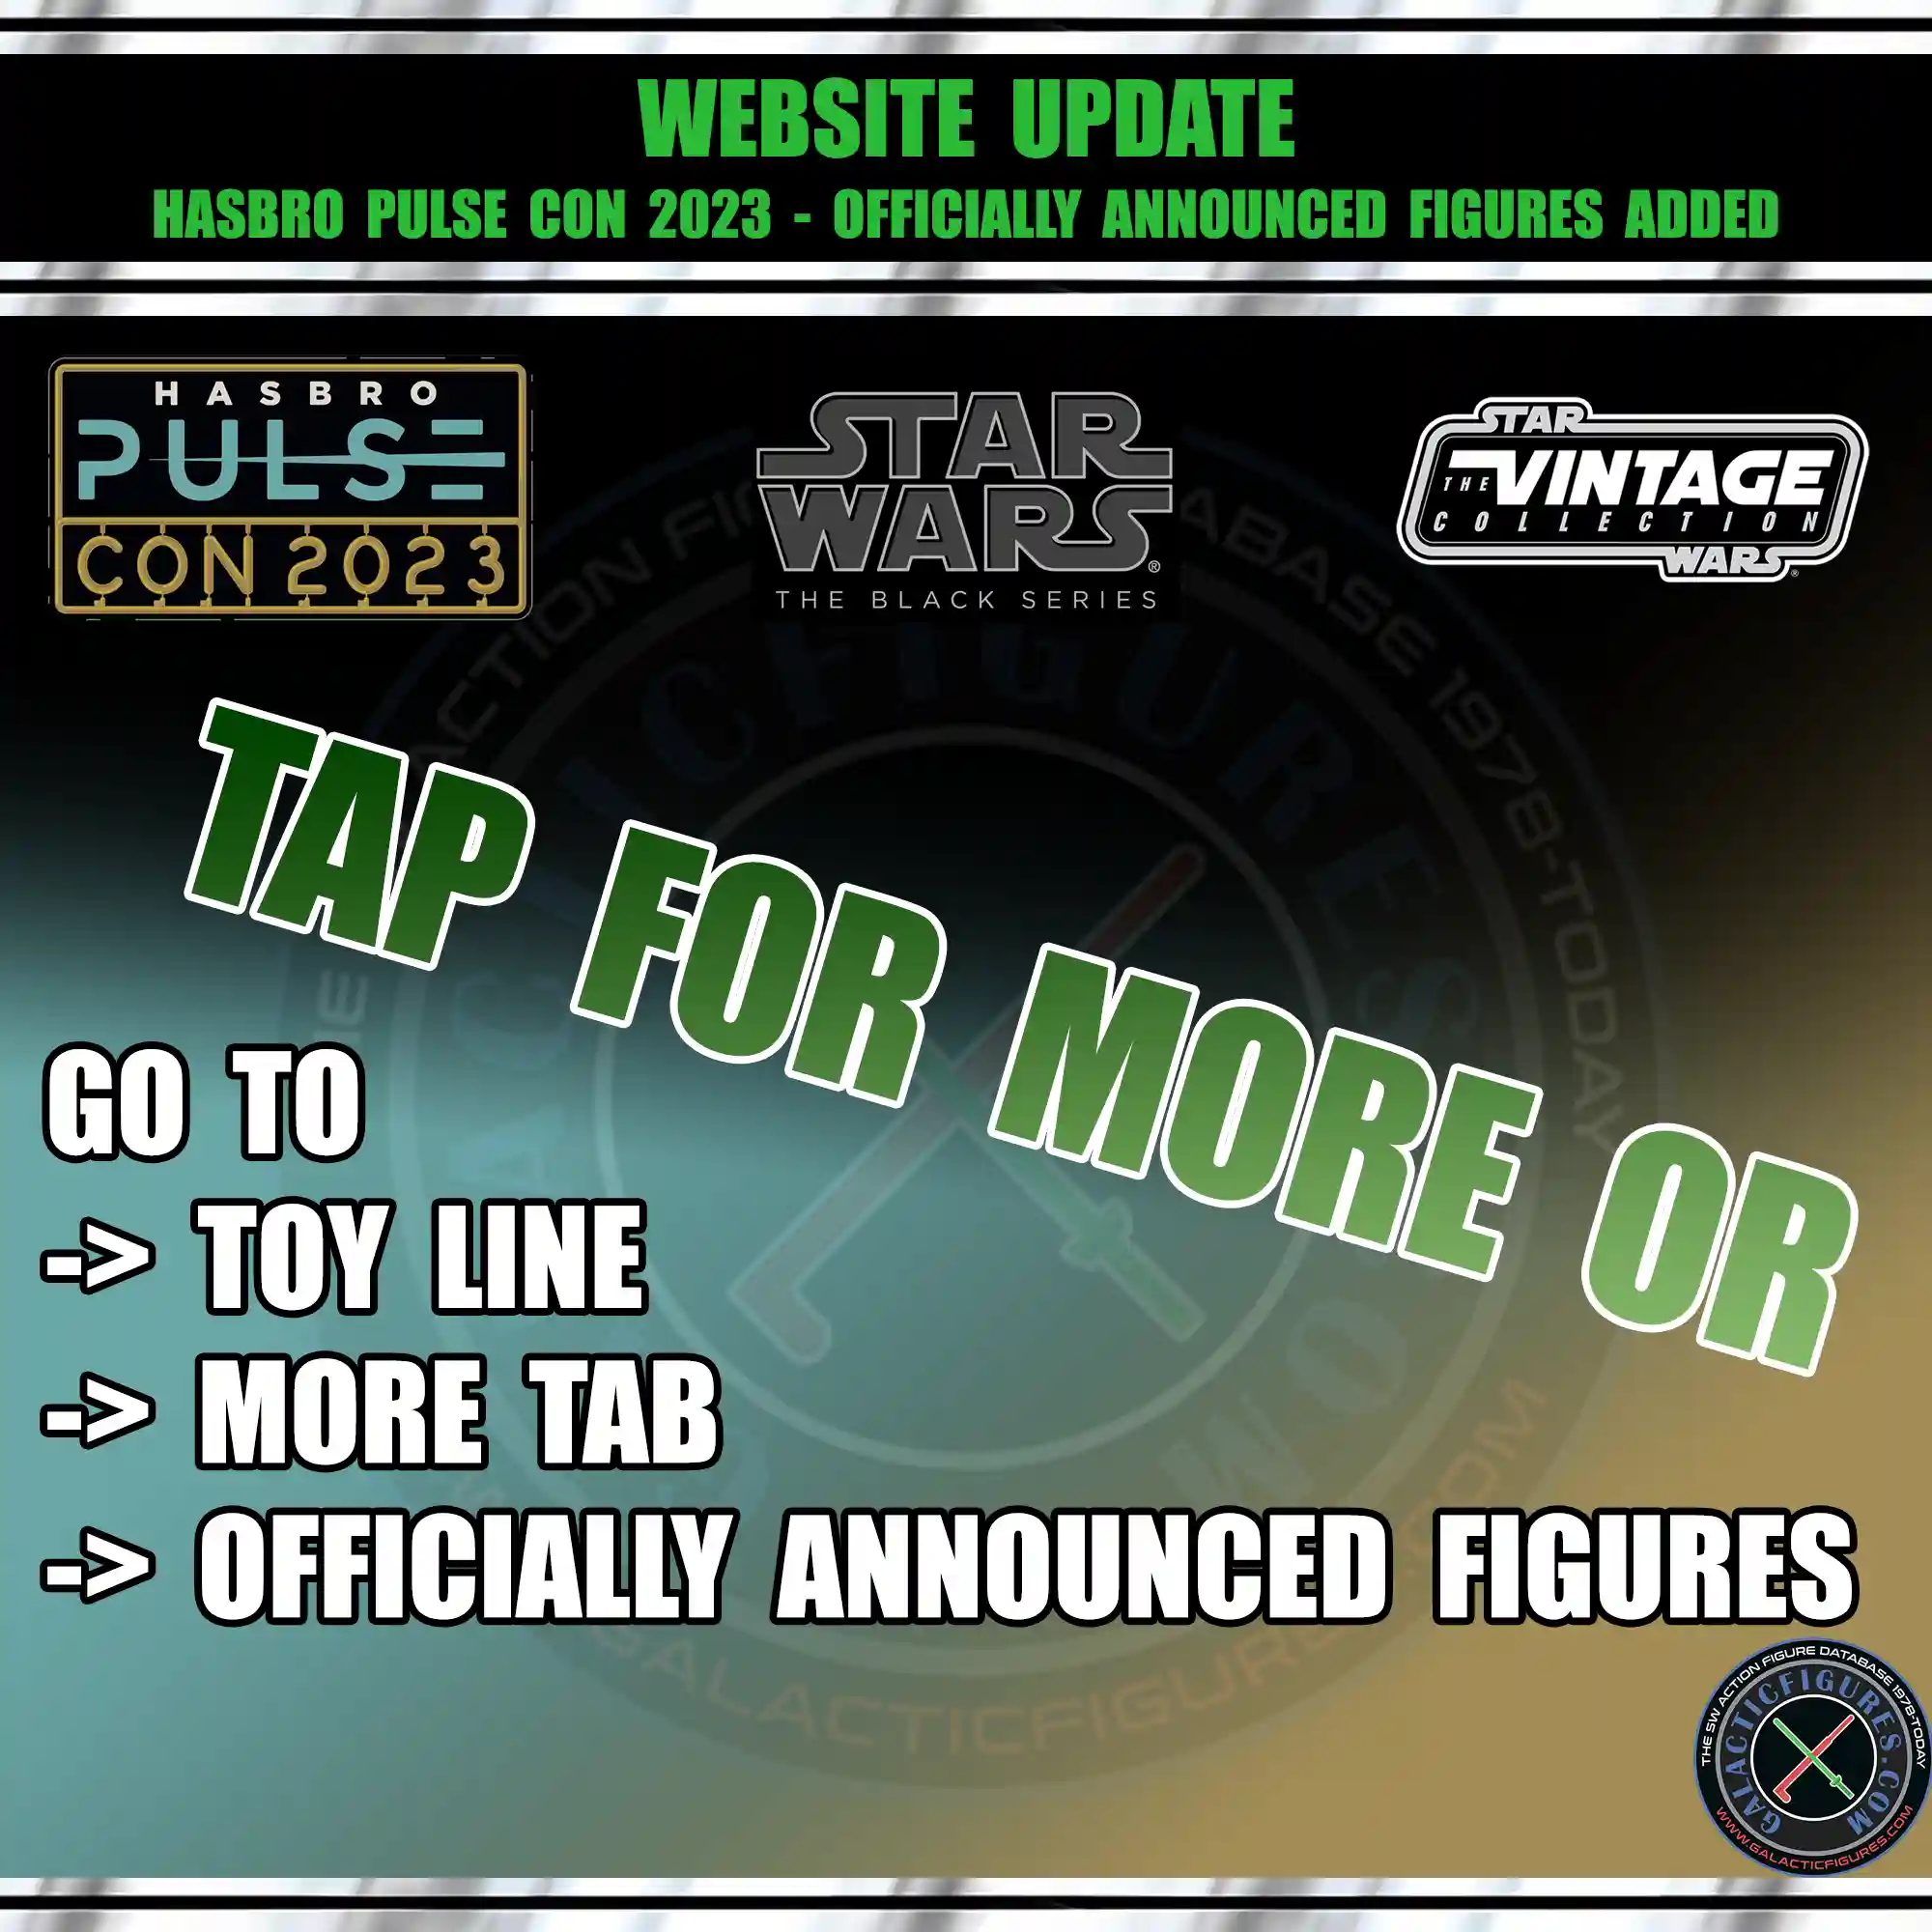 Database Update With Hasbro Pulse Con 2023 Announcements